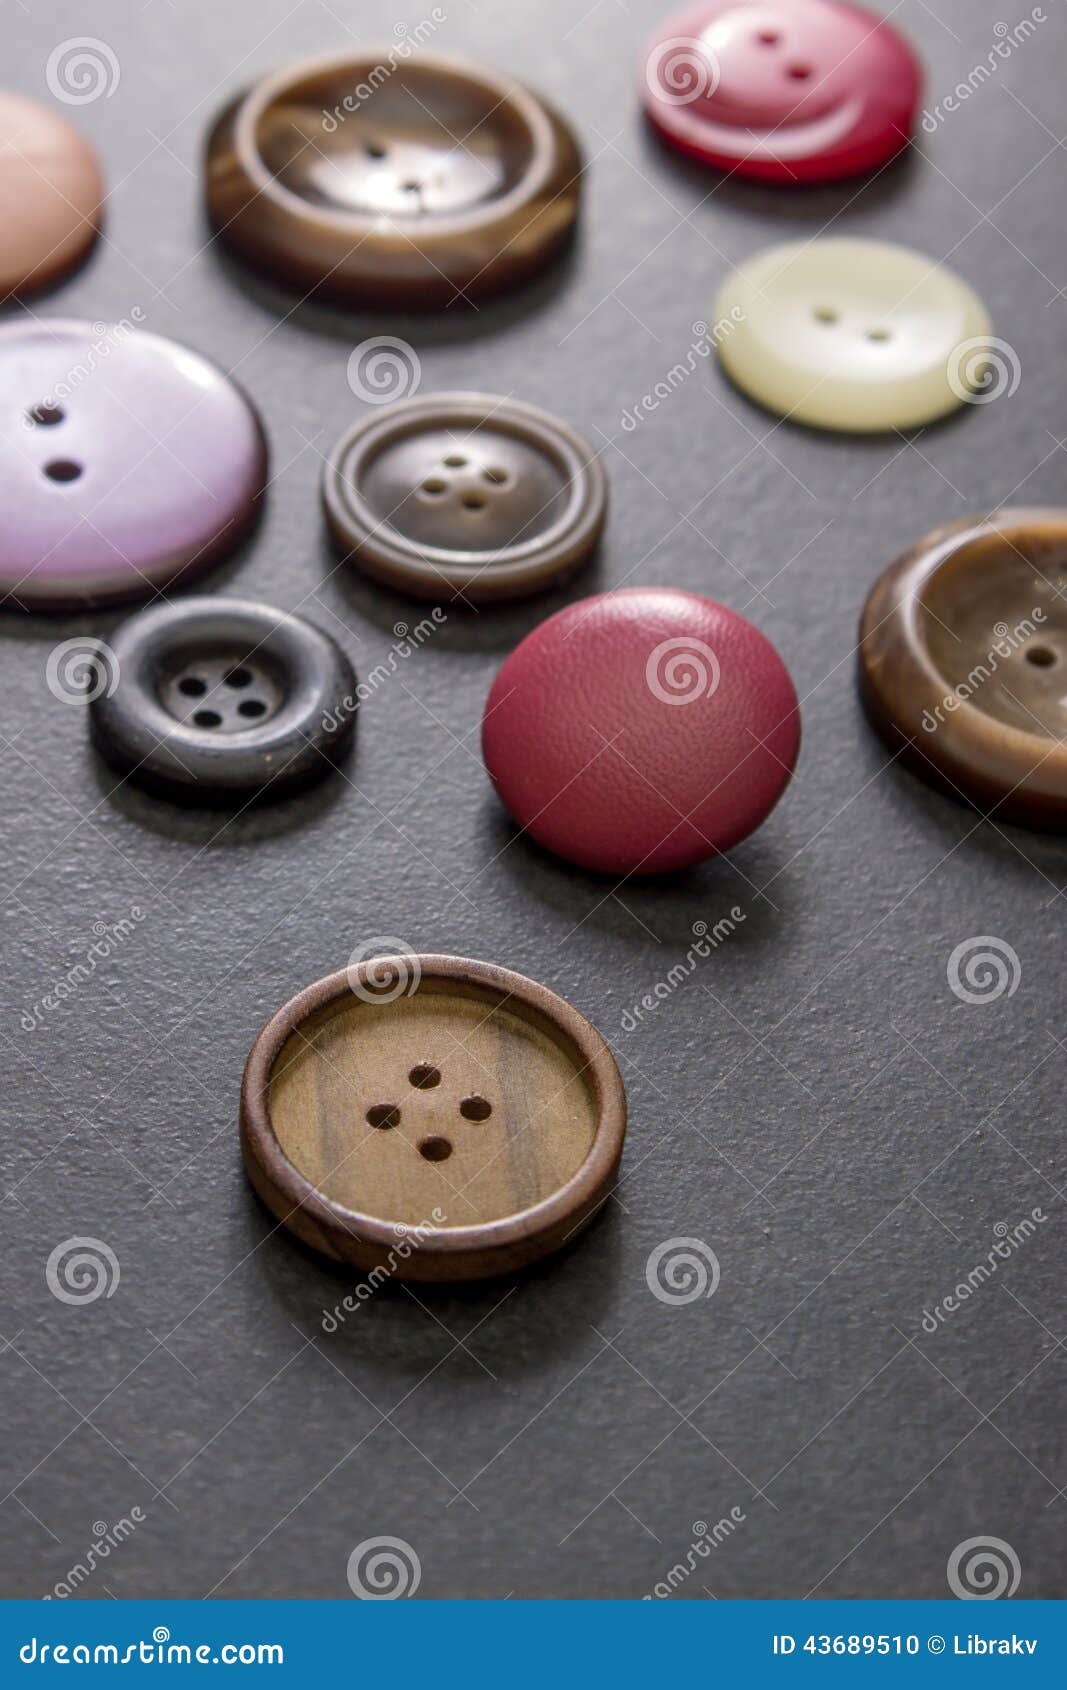 Collection of buttons stock photo. Image of vertical - 43689510